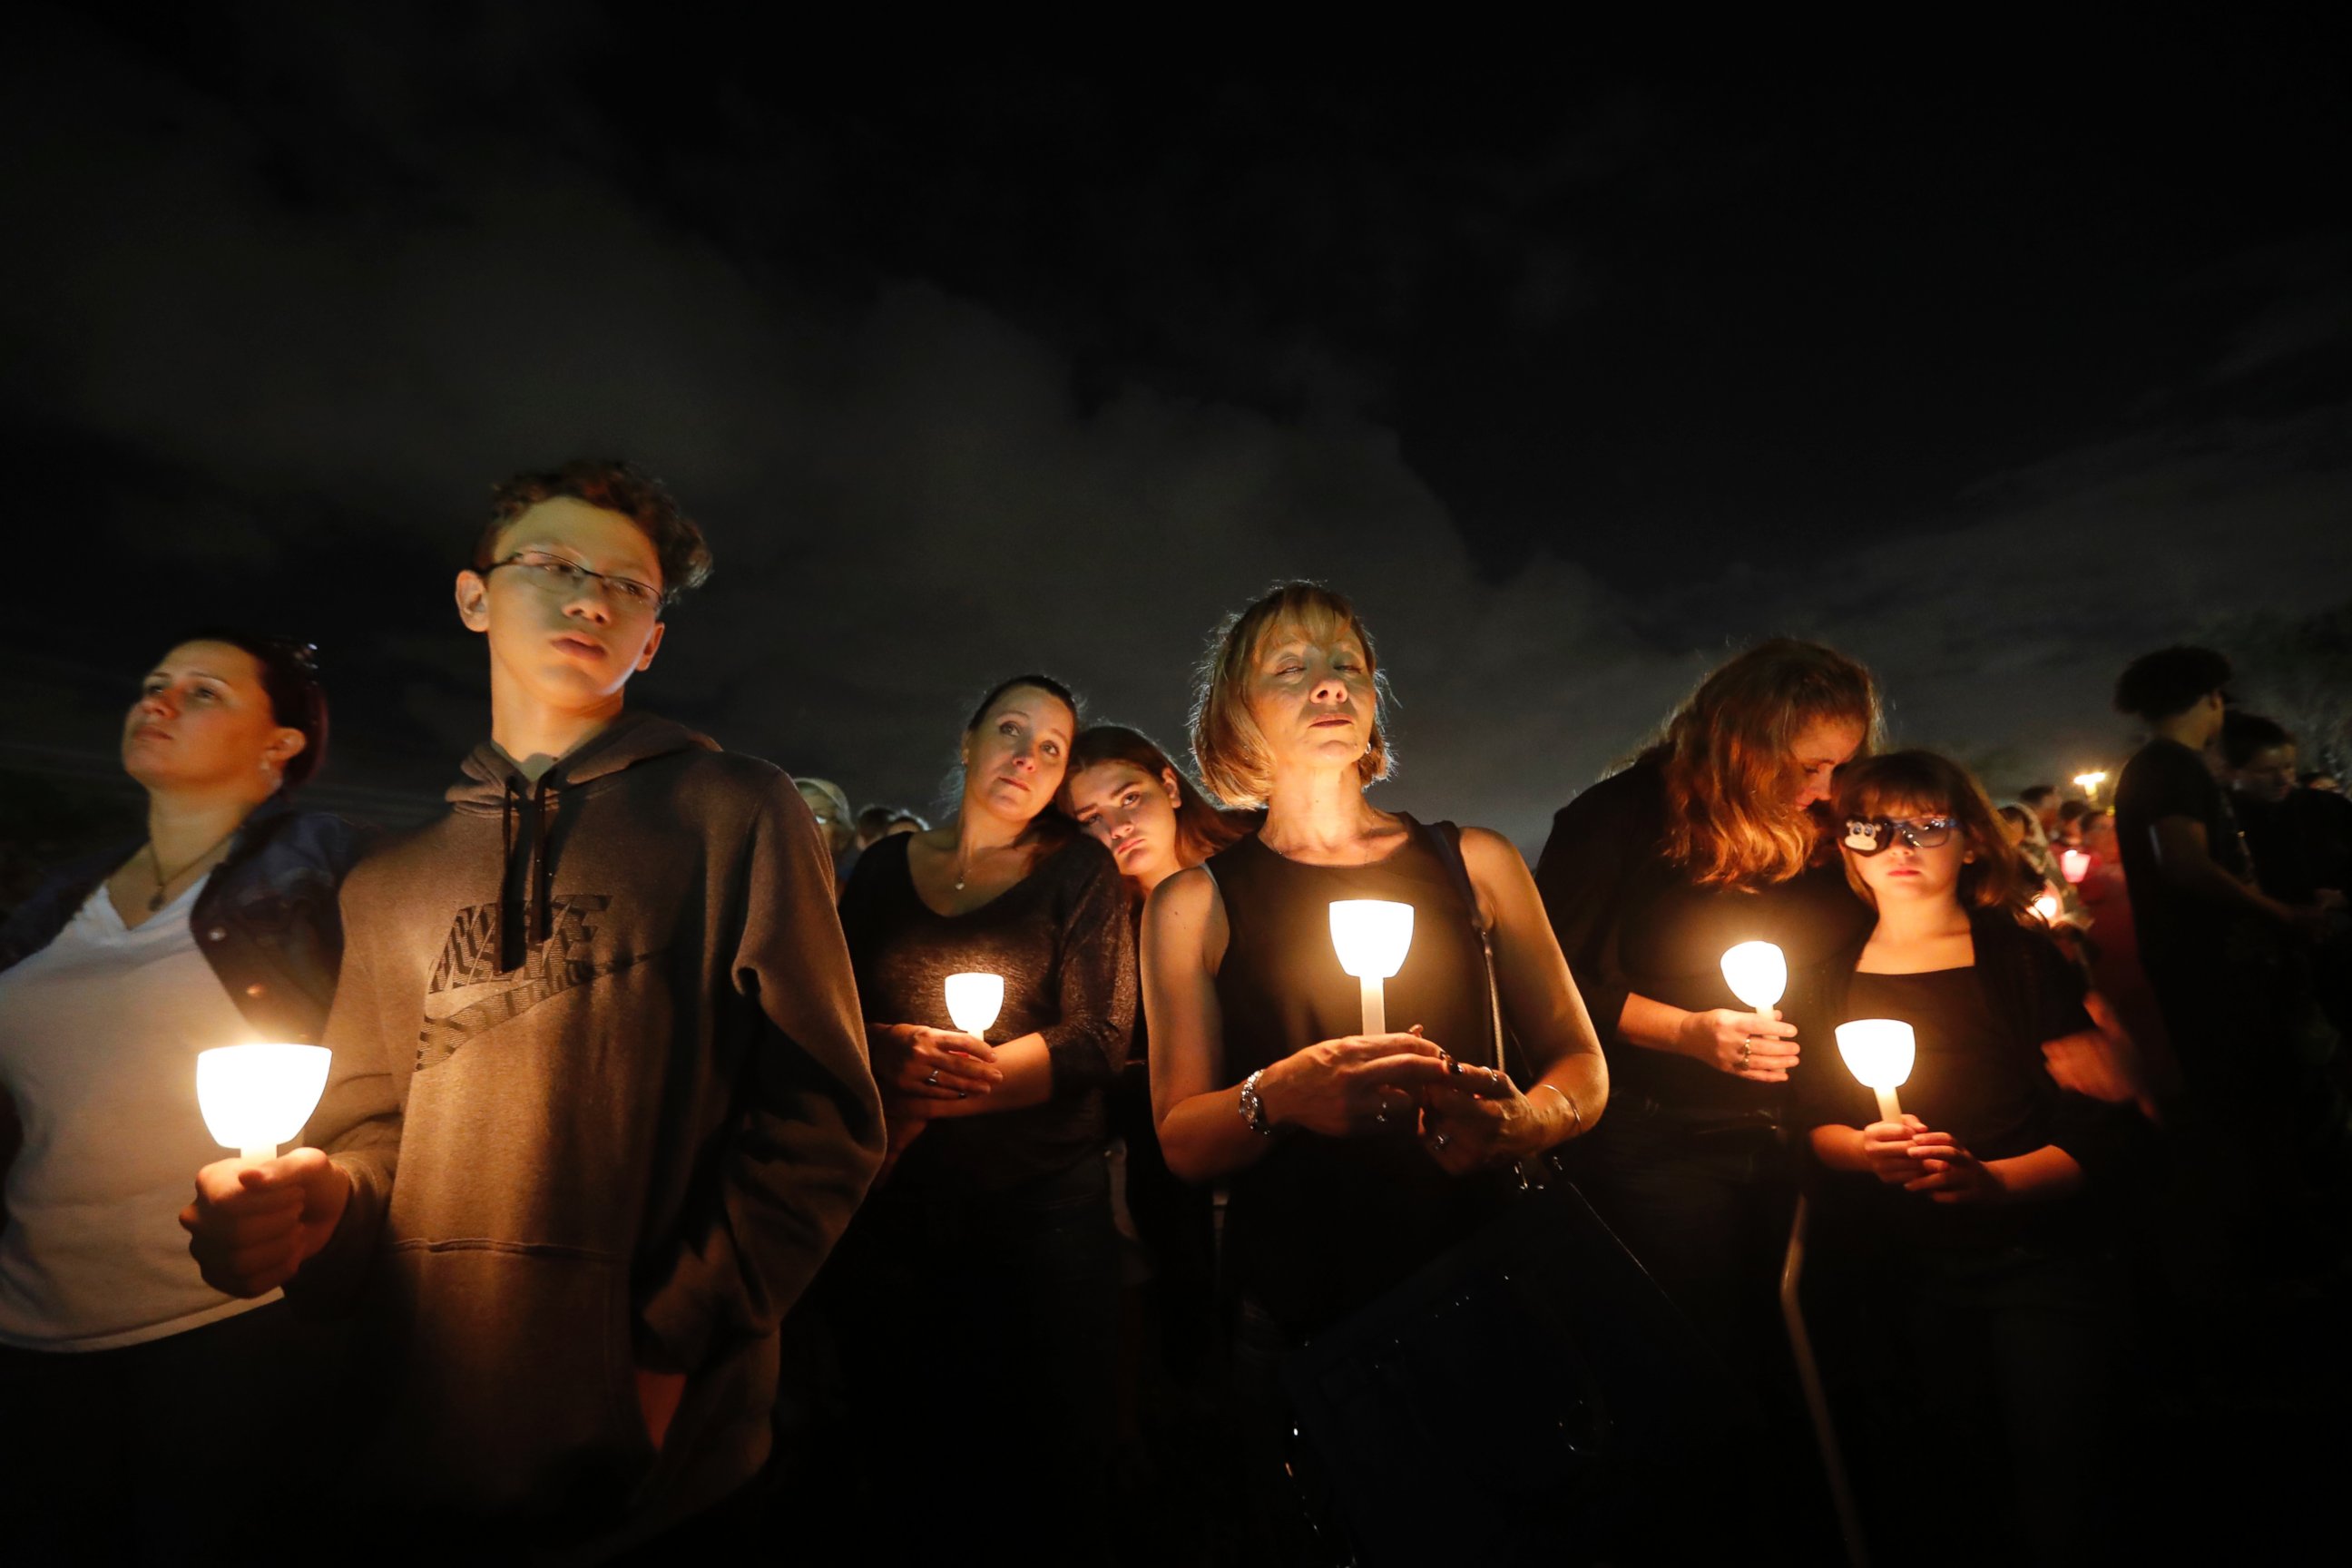 People participate in a candlelight vigil in memory of the 17 students and faculty who were killed in the Wednesday mass shooting at Marjory Stoneman Douglas High School in Parkland, Fla., Monday, Feb. 19, 2018.